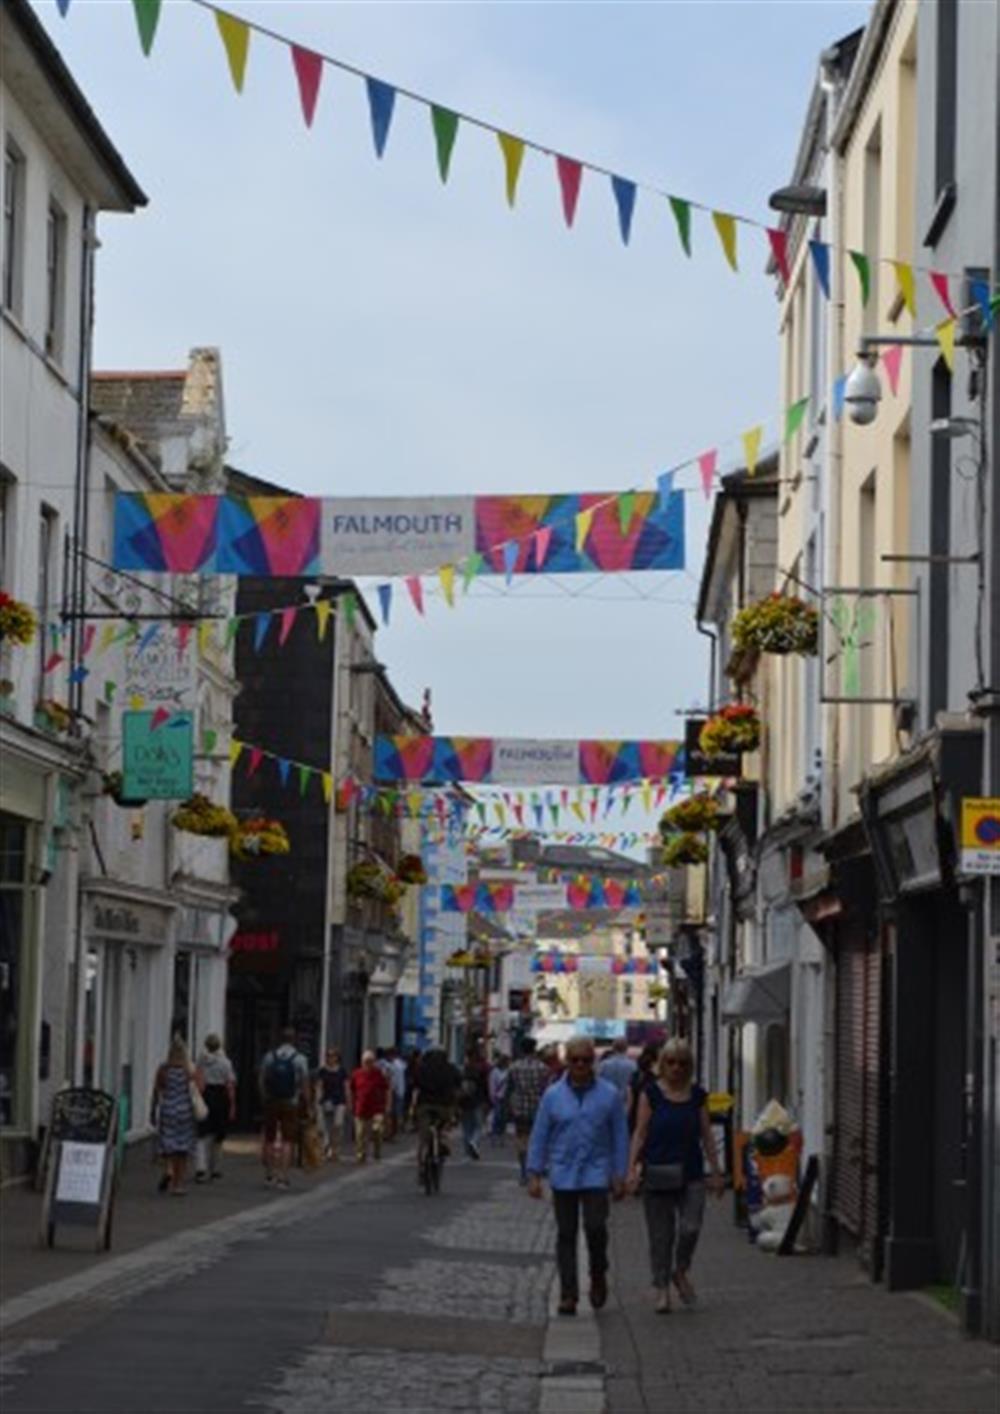 Falmouth town has an array of shops, plus a range of restaurants, cafes and art galleries at 3C, The Old Sail Loft in Helford Passage